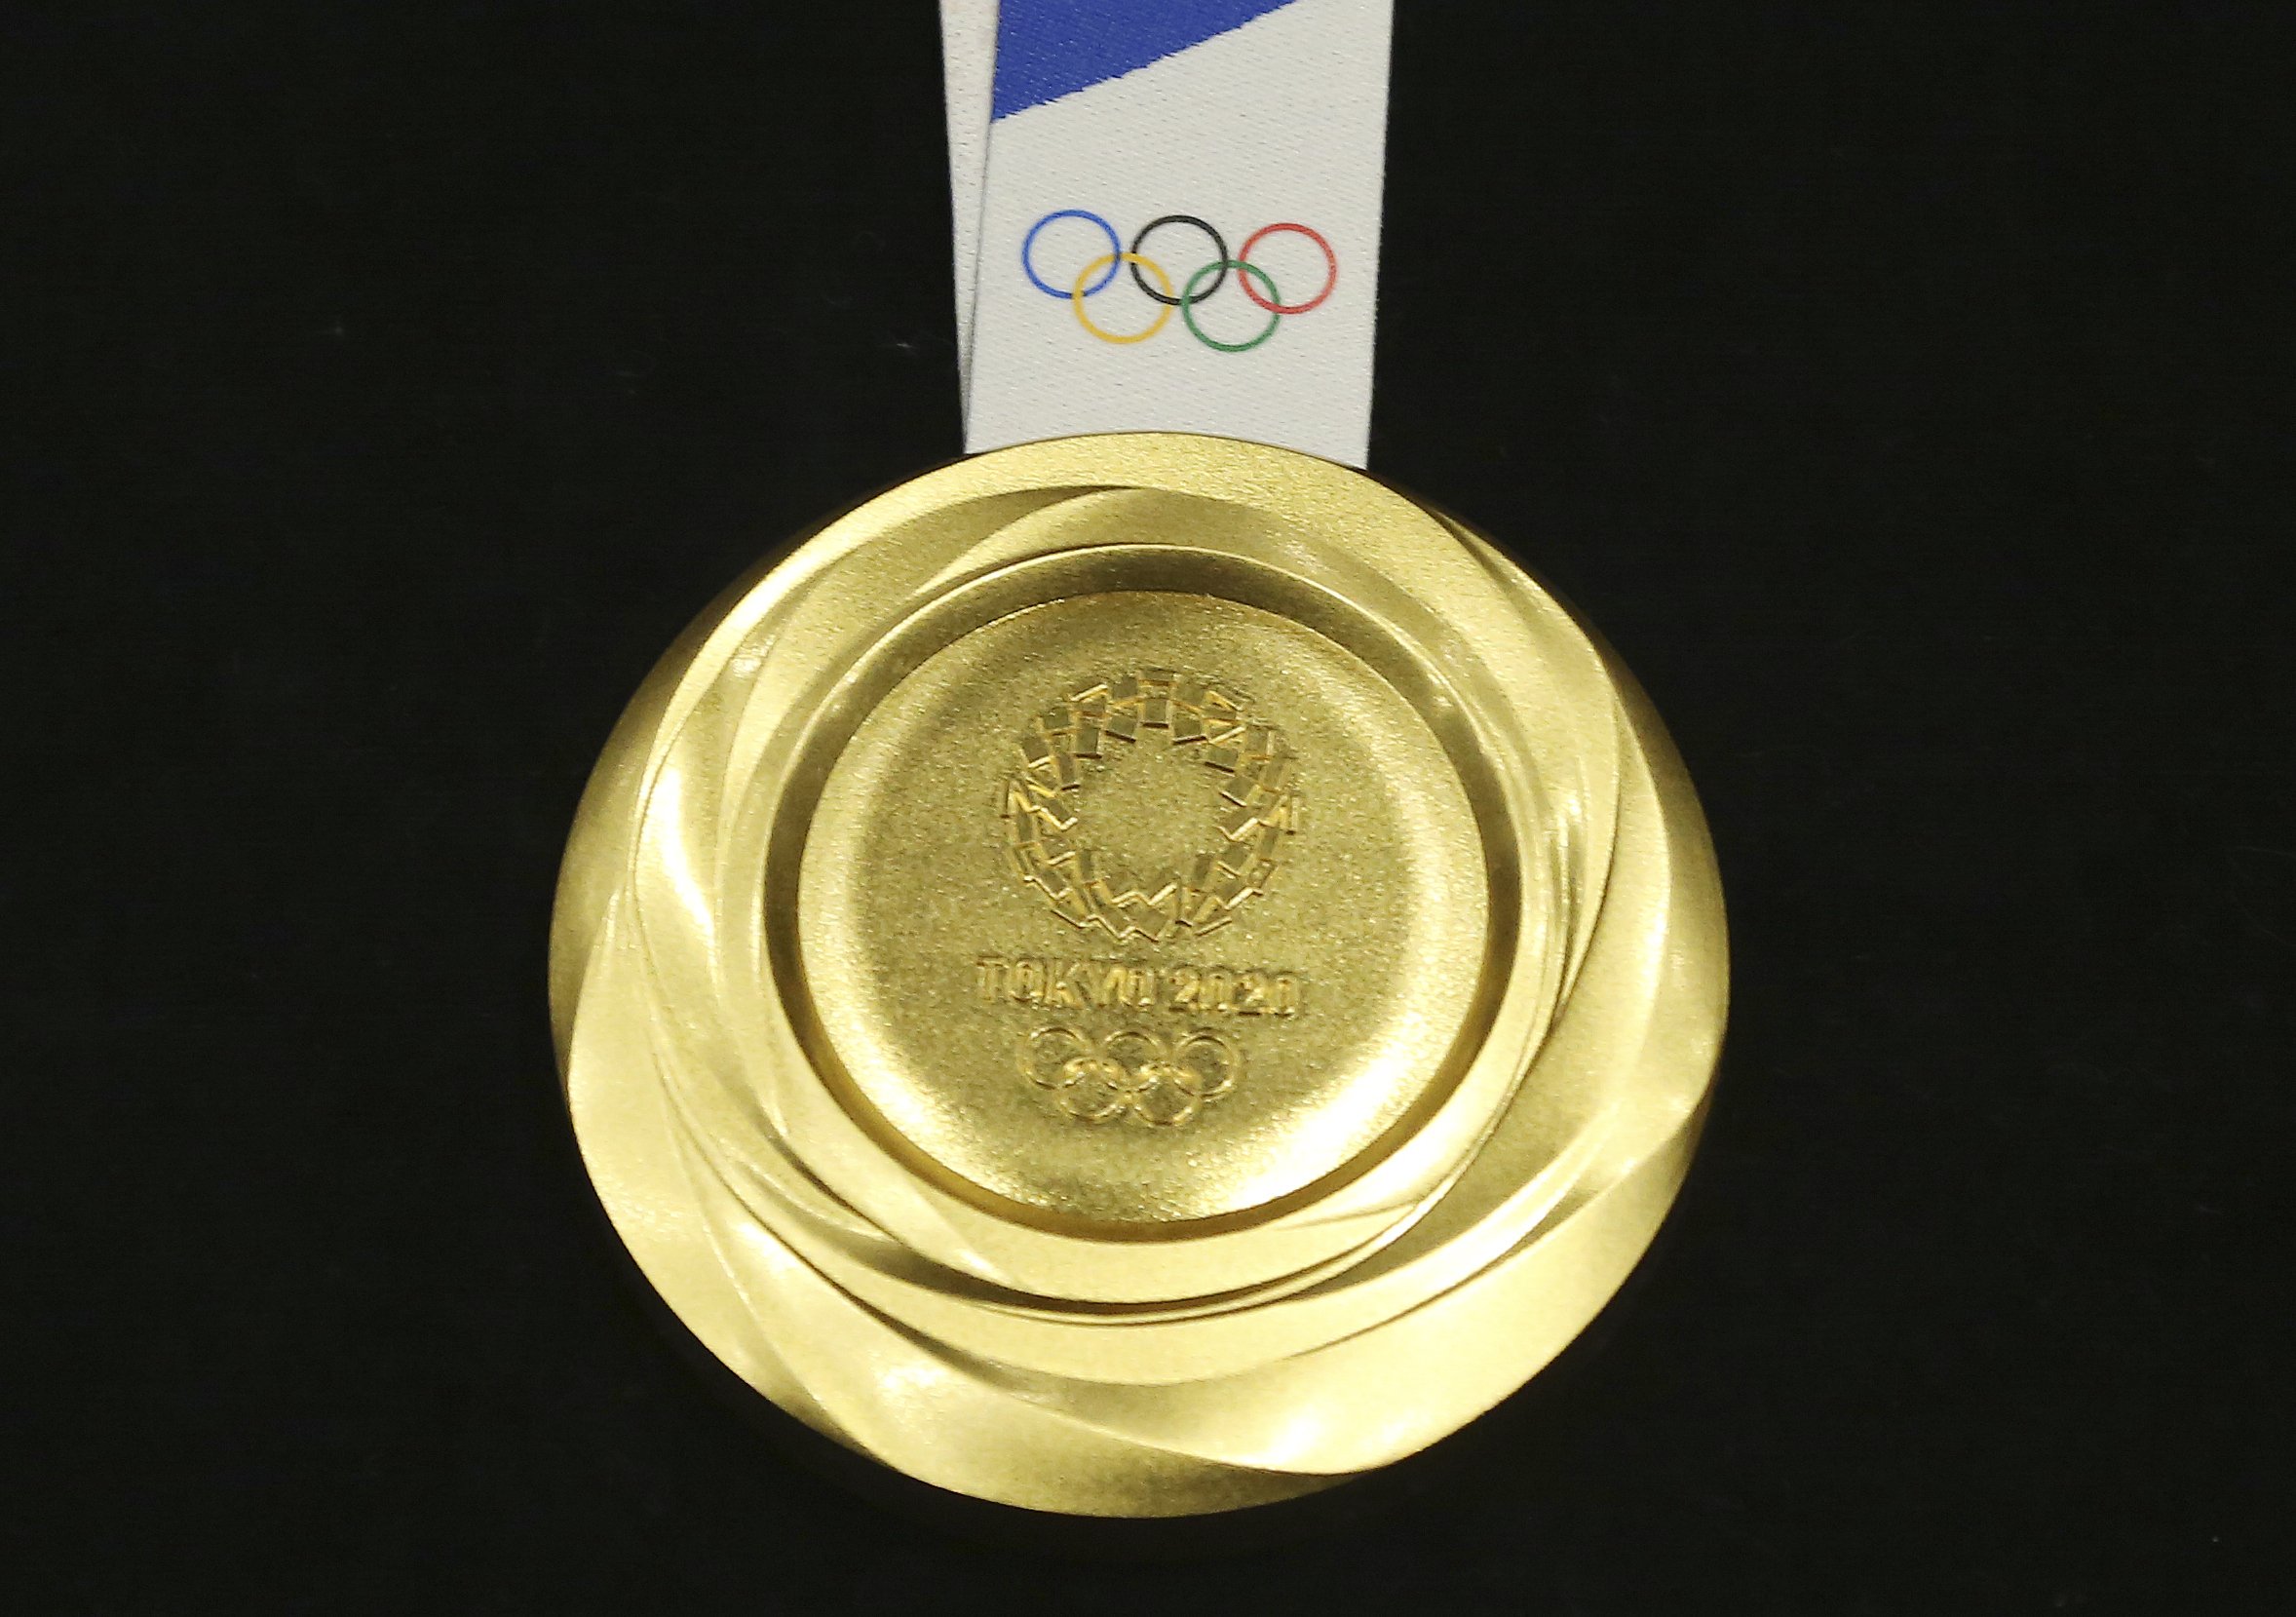 Tokyo 2020 Medals Tokyo 2020 Olympic medals are made from recycled